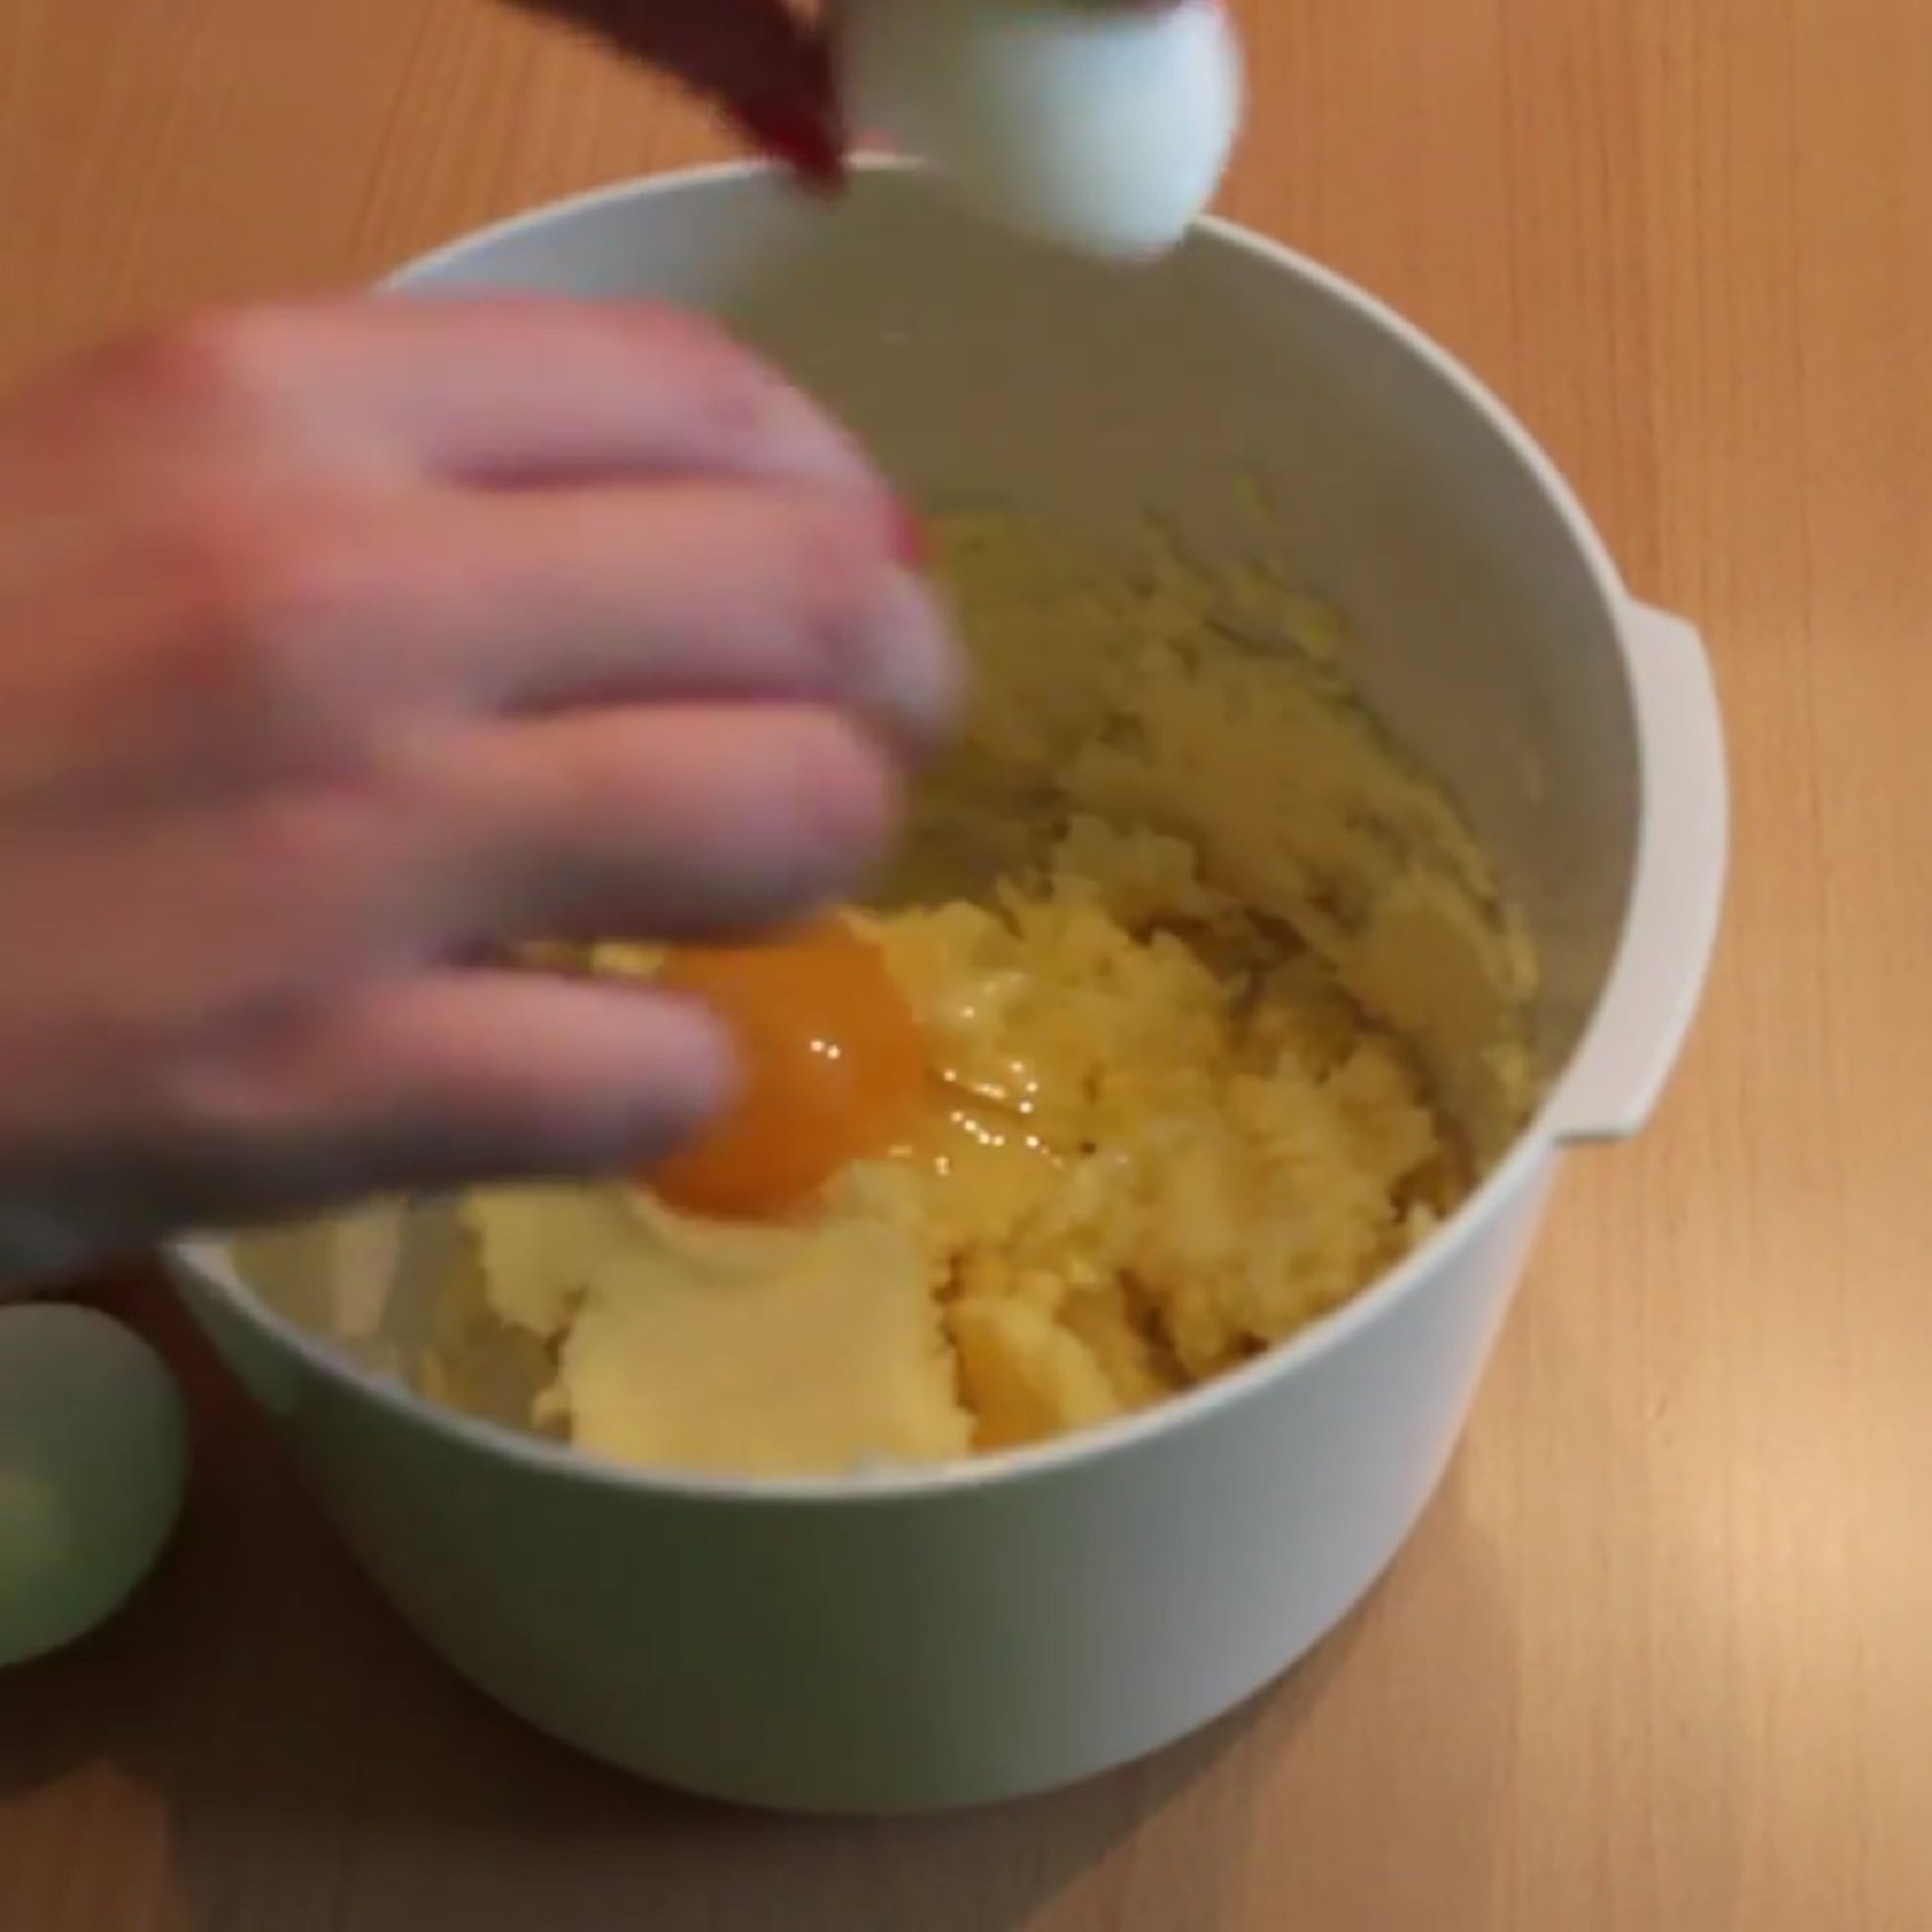 Preheat the oven to 170°C/340°F. Cream the butter and the sugar together in a bowl. Add eggs one-by-one.